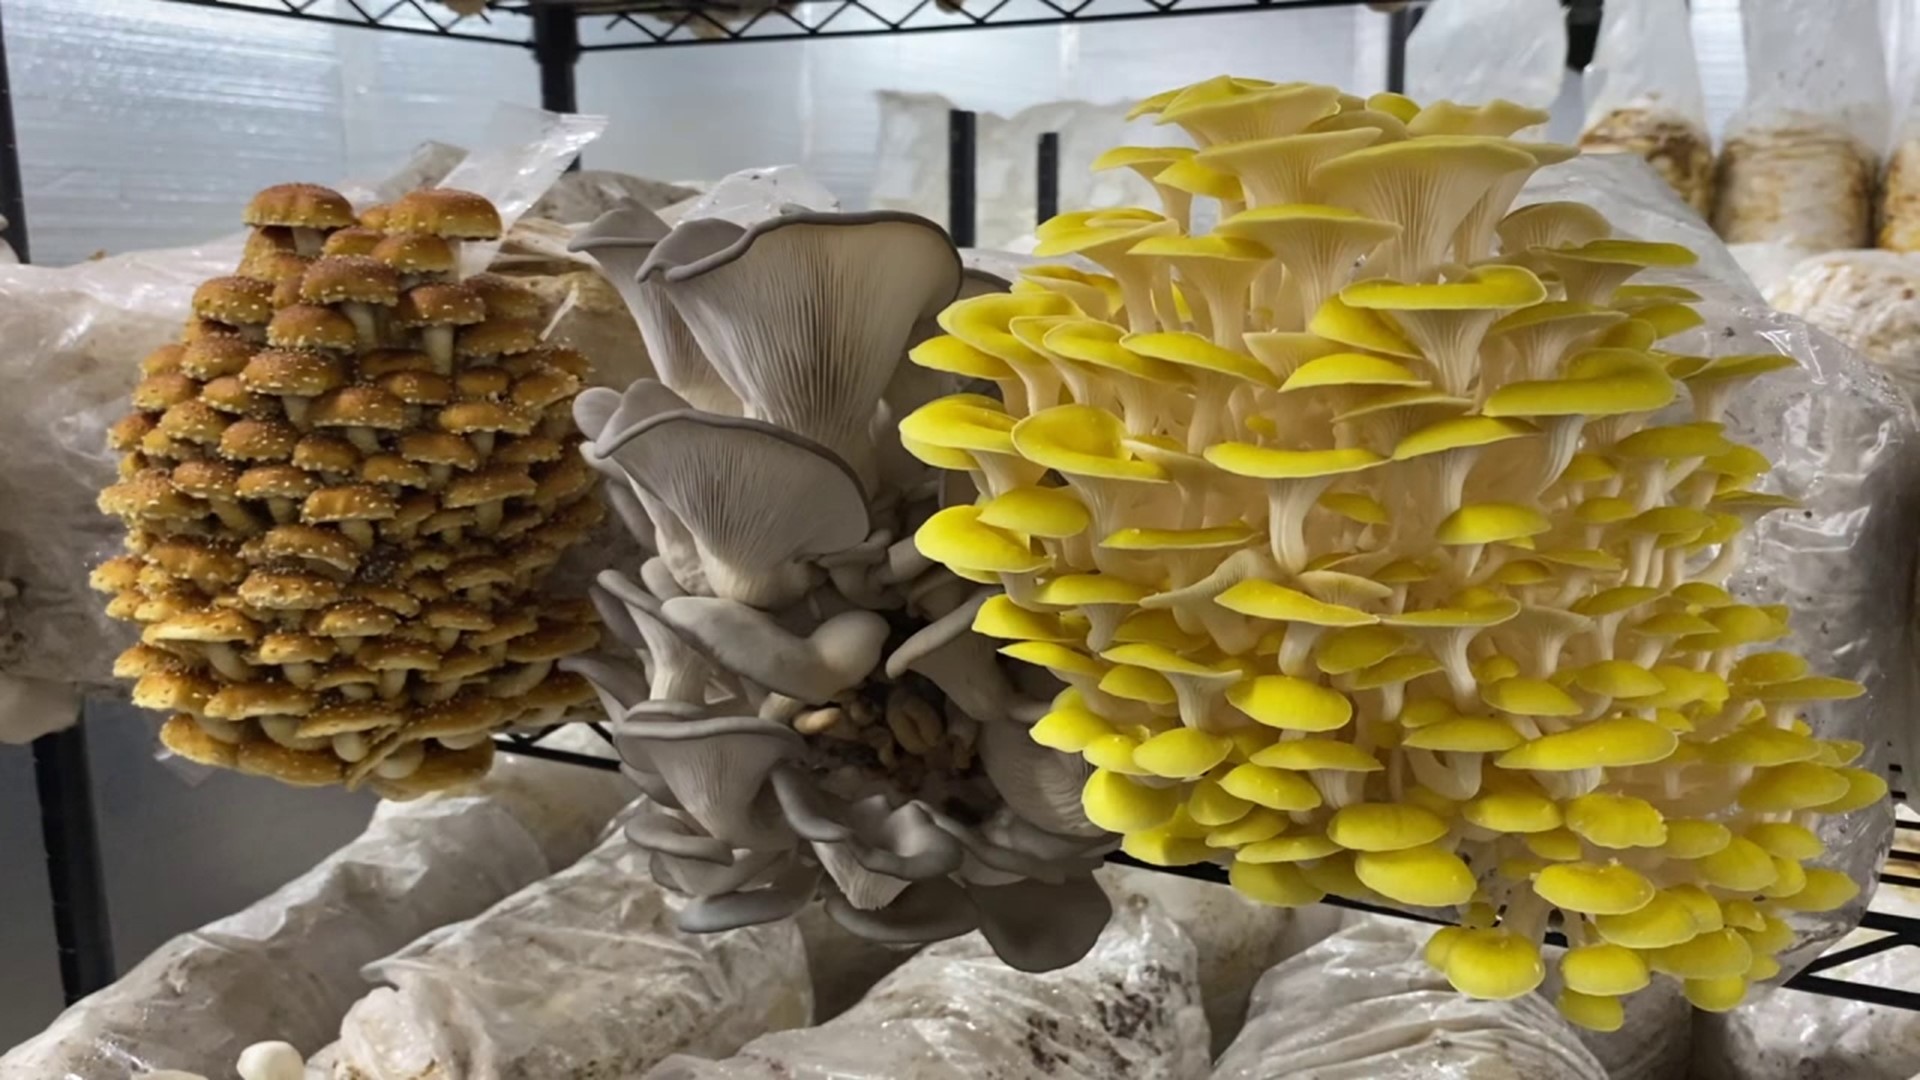 Ten Mile Mushrooms is not only celebrating the growth of its mushrooms but also the growth of its business.